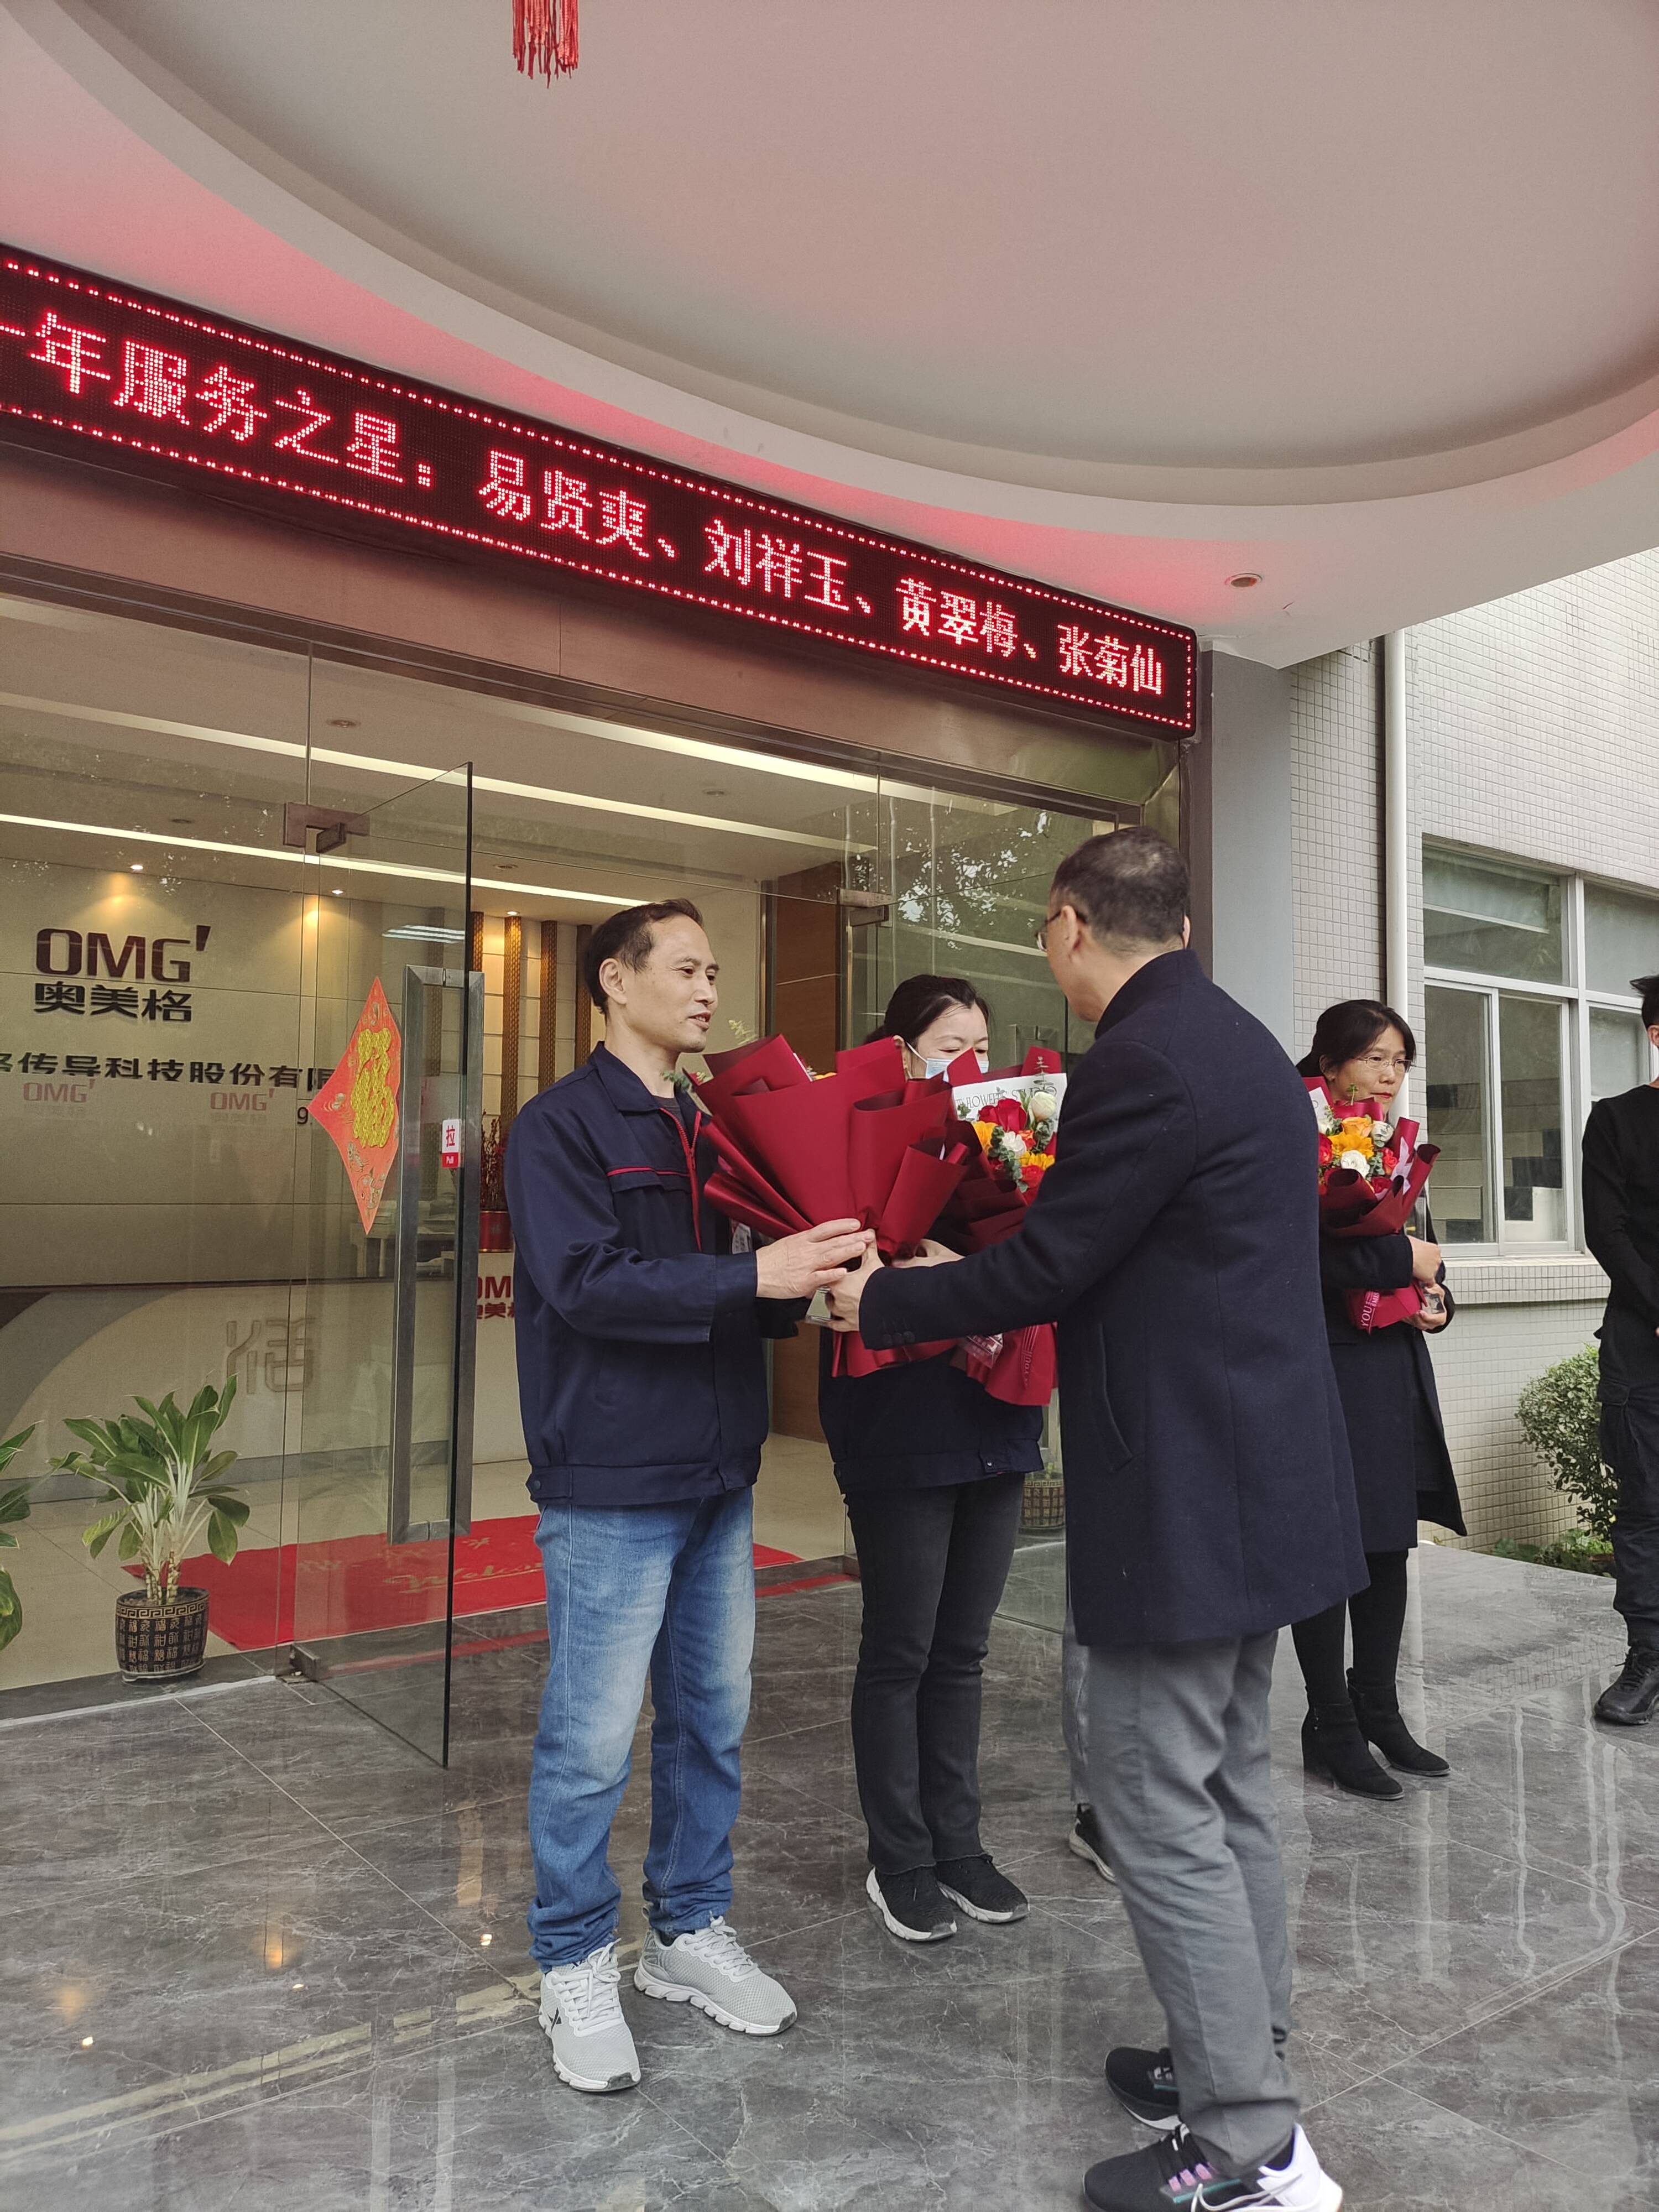 Liu Zhong, chairman of OMG, thanked the employees for their dedication to the company, dedication to their duties, and contributions to the company's development.